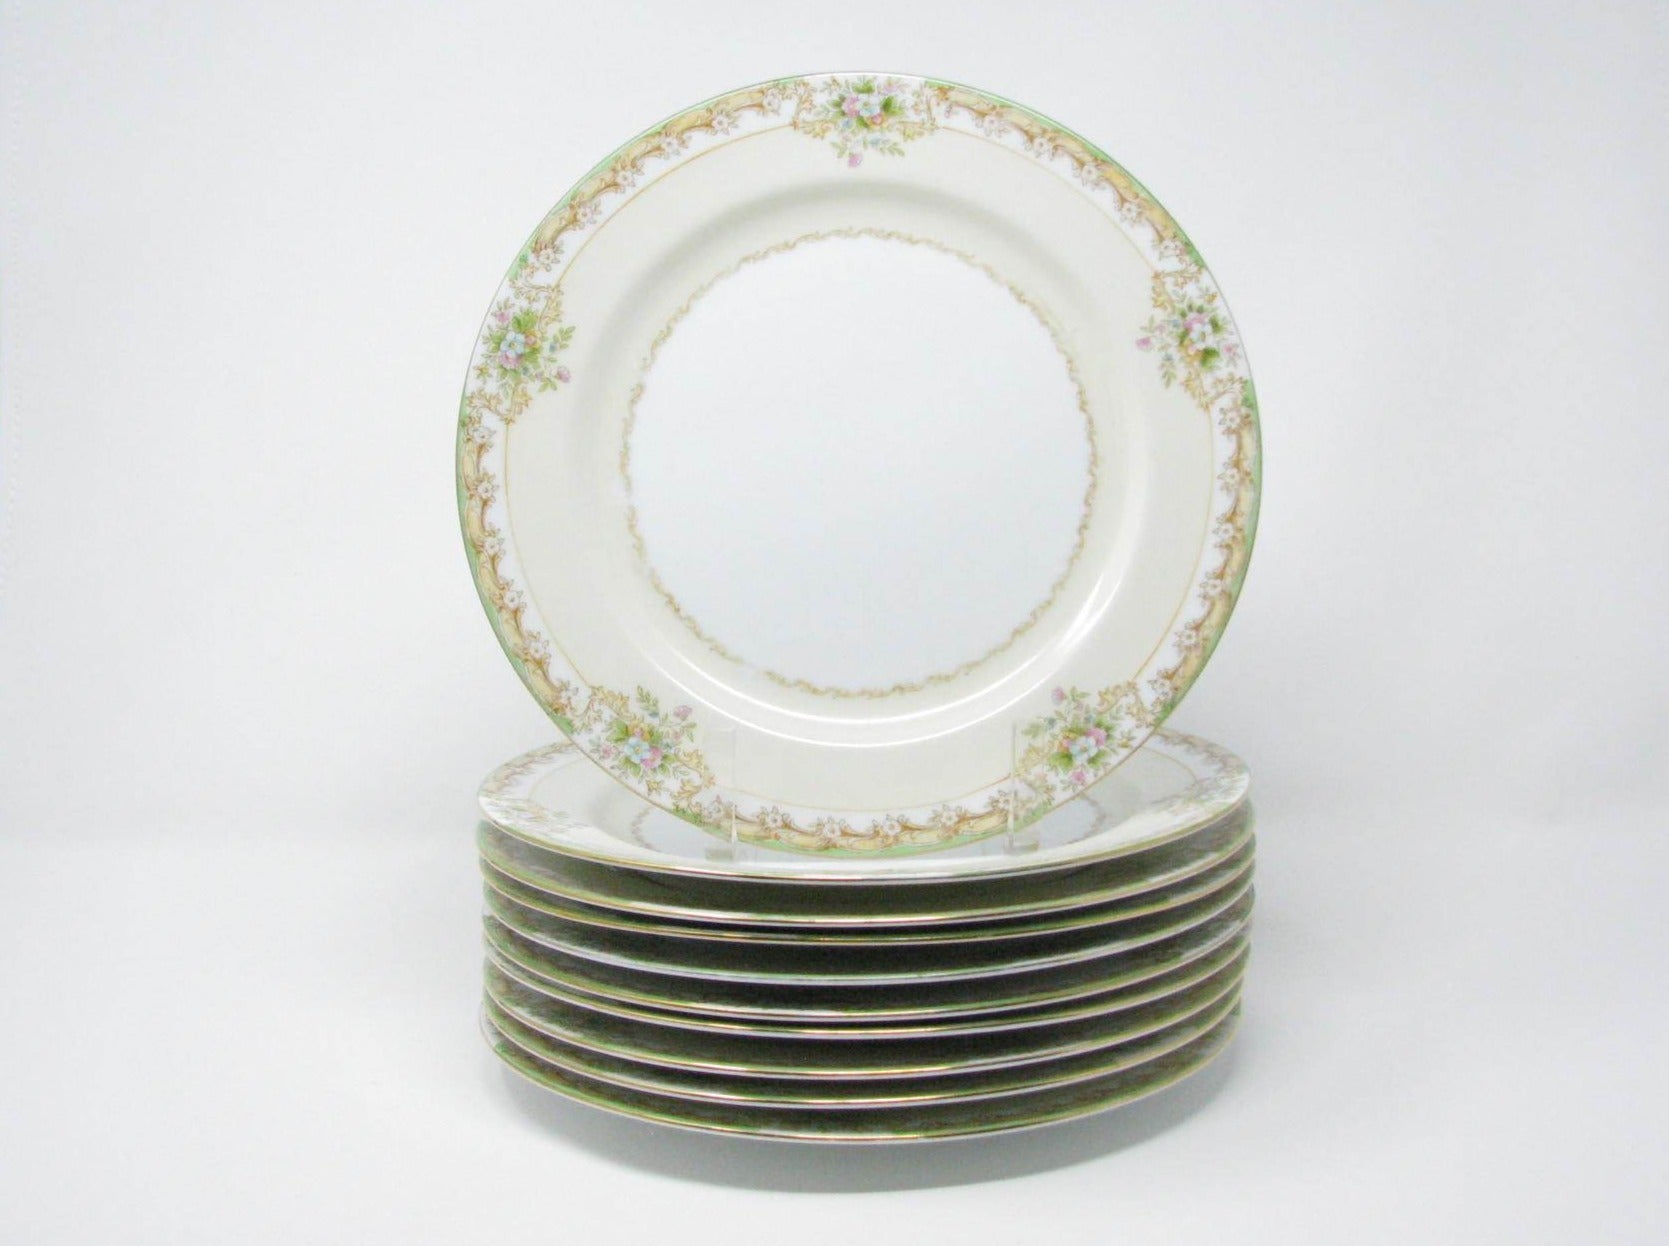 edgebrookhouse - Antique Noritake Hand-Painted Dinner Plates with Green, Gold and Floral Rim - Set of 10